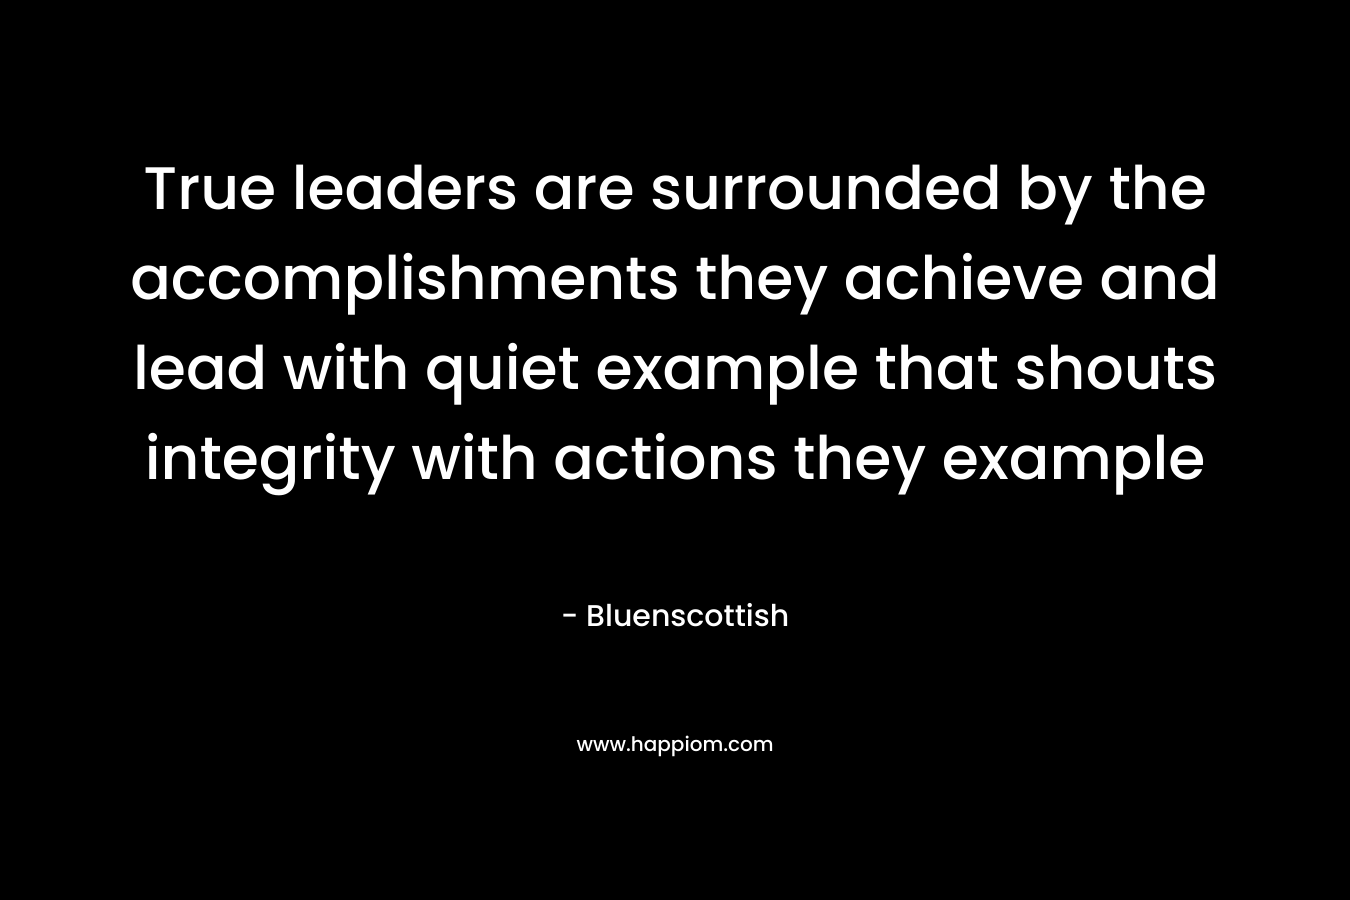 True leaders are surrounded by the accomplishments they achieve and lead with quiet example that shouts integrity with actions they example